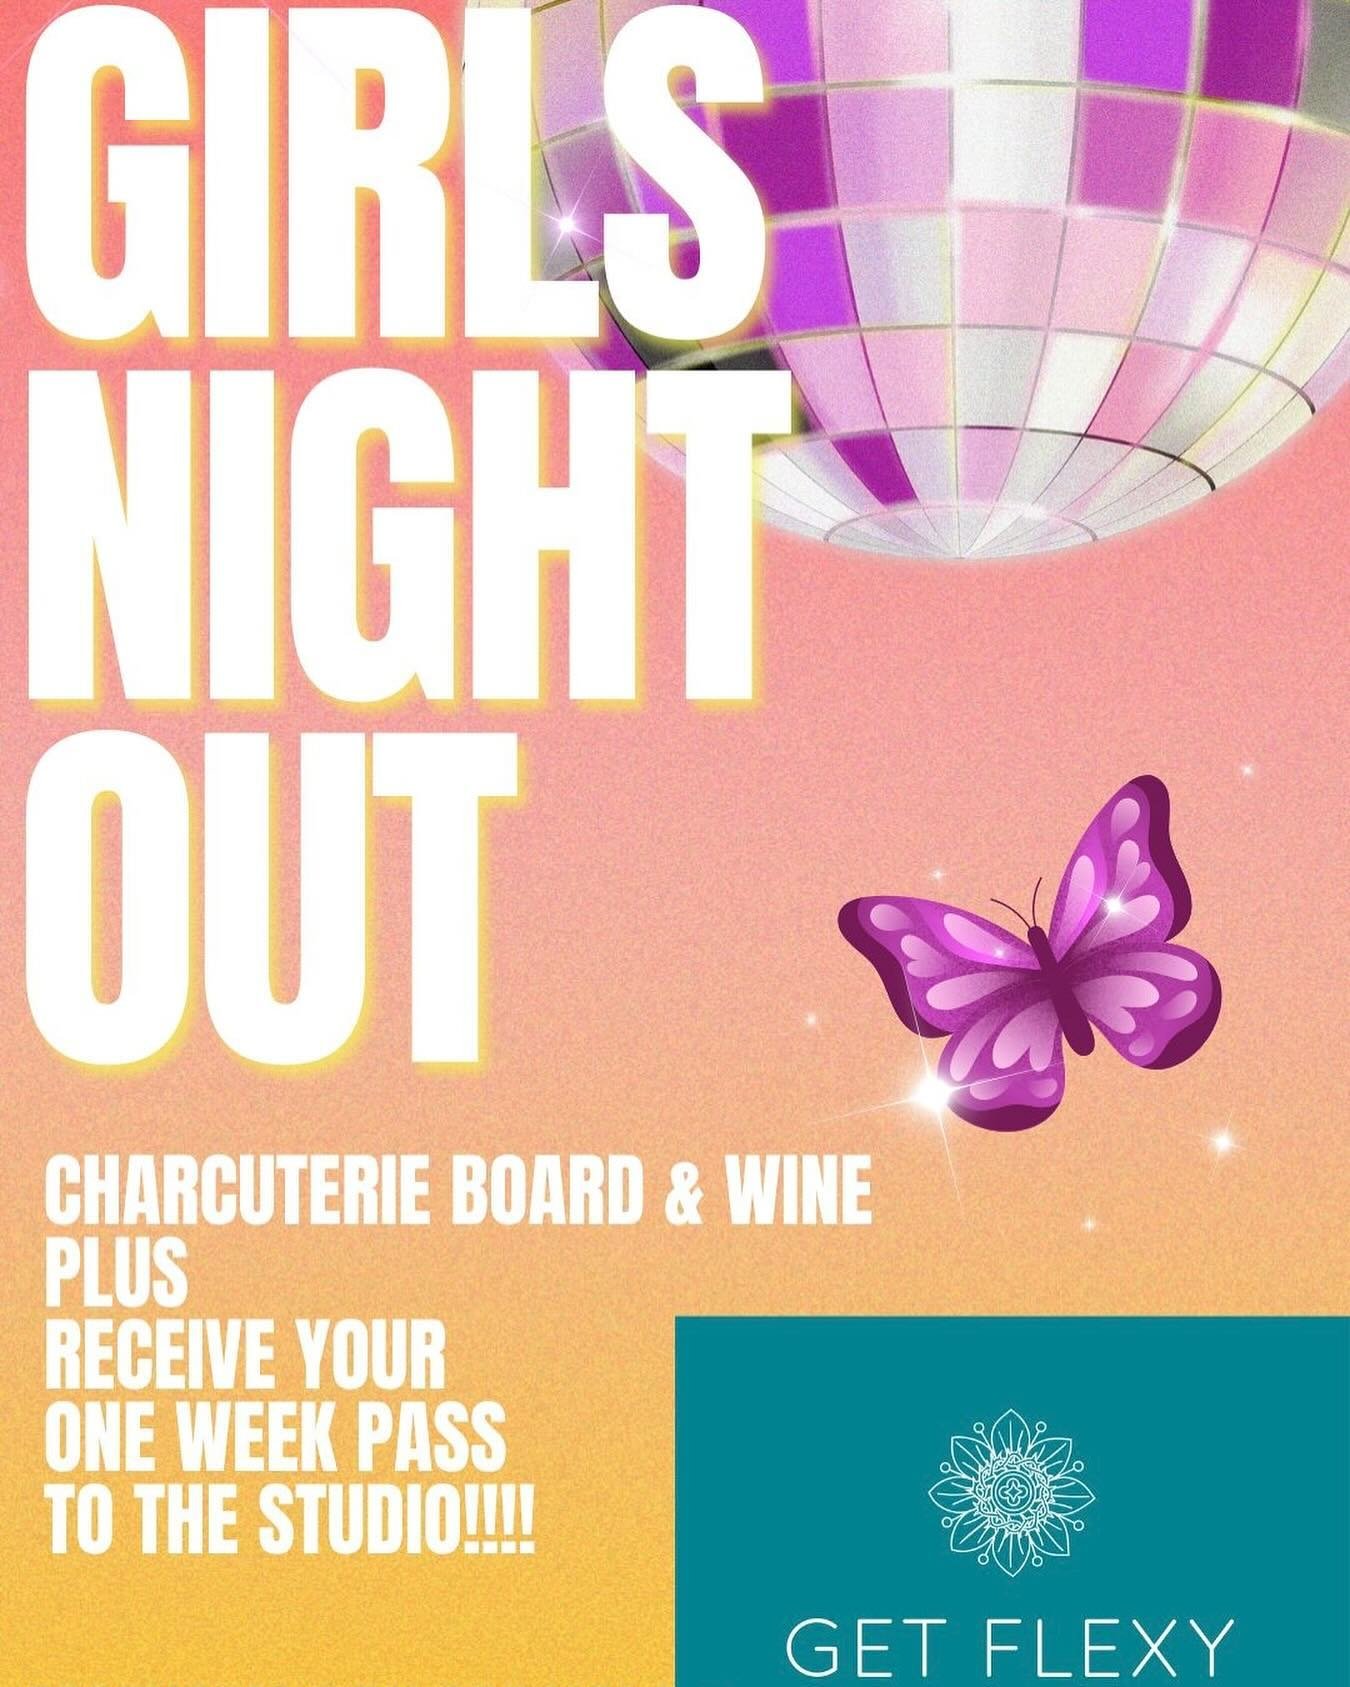 Charcuterie Board, Wine, Sales &amp; more&hellip;. Stop by  and gather your FREE ONE WEEK PASS for Girl&rsquo;s Night OUT!!!